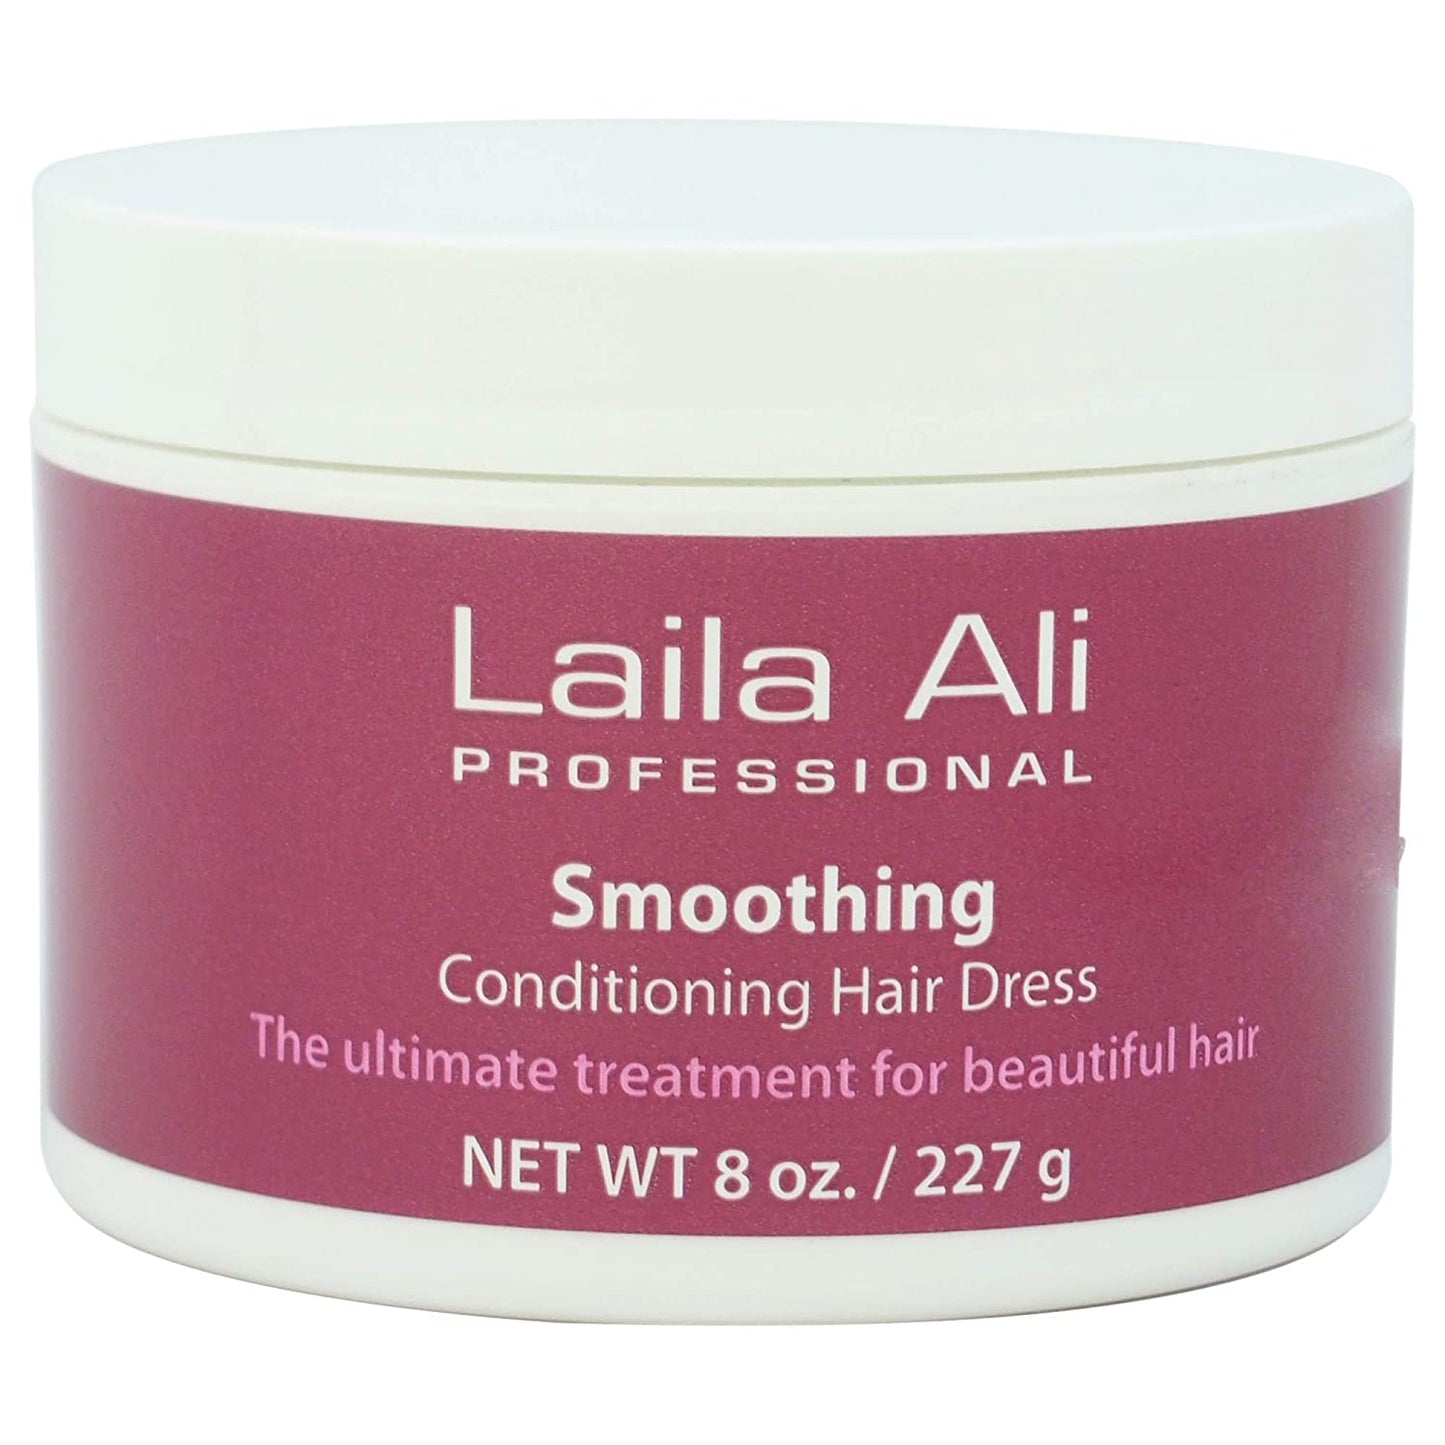 Laila Ali: Smoothing Conditioning Hair Dress